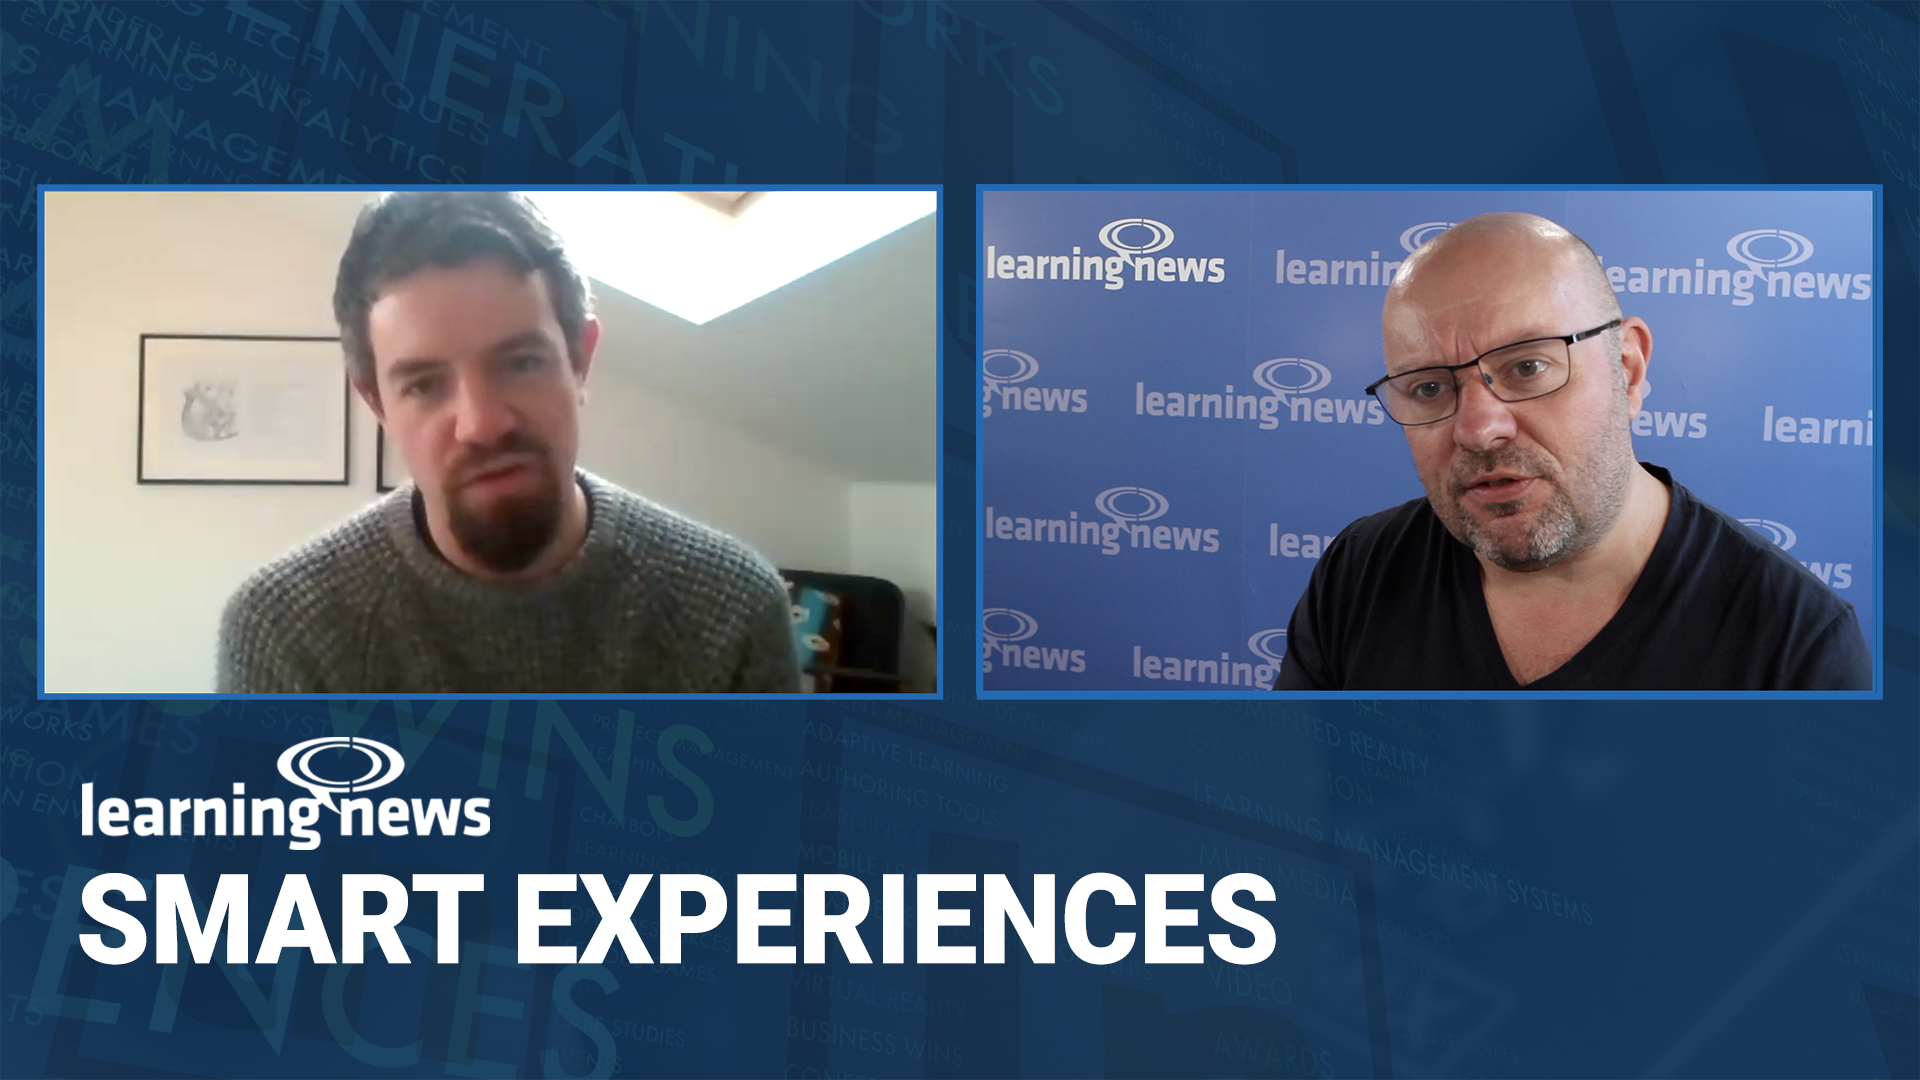 Toby Harris, Director - Product Marketing, Filtered, in discussion with Rob Clarke from Learning News